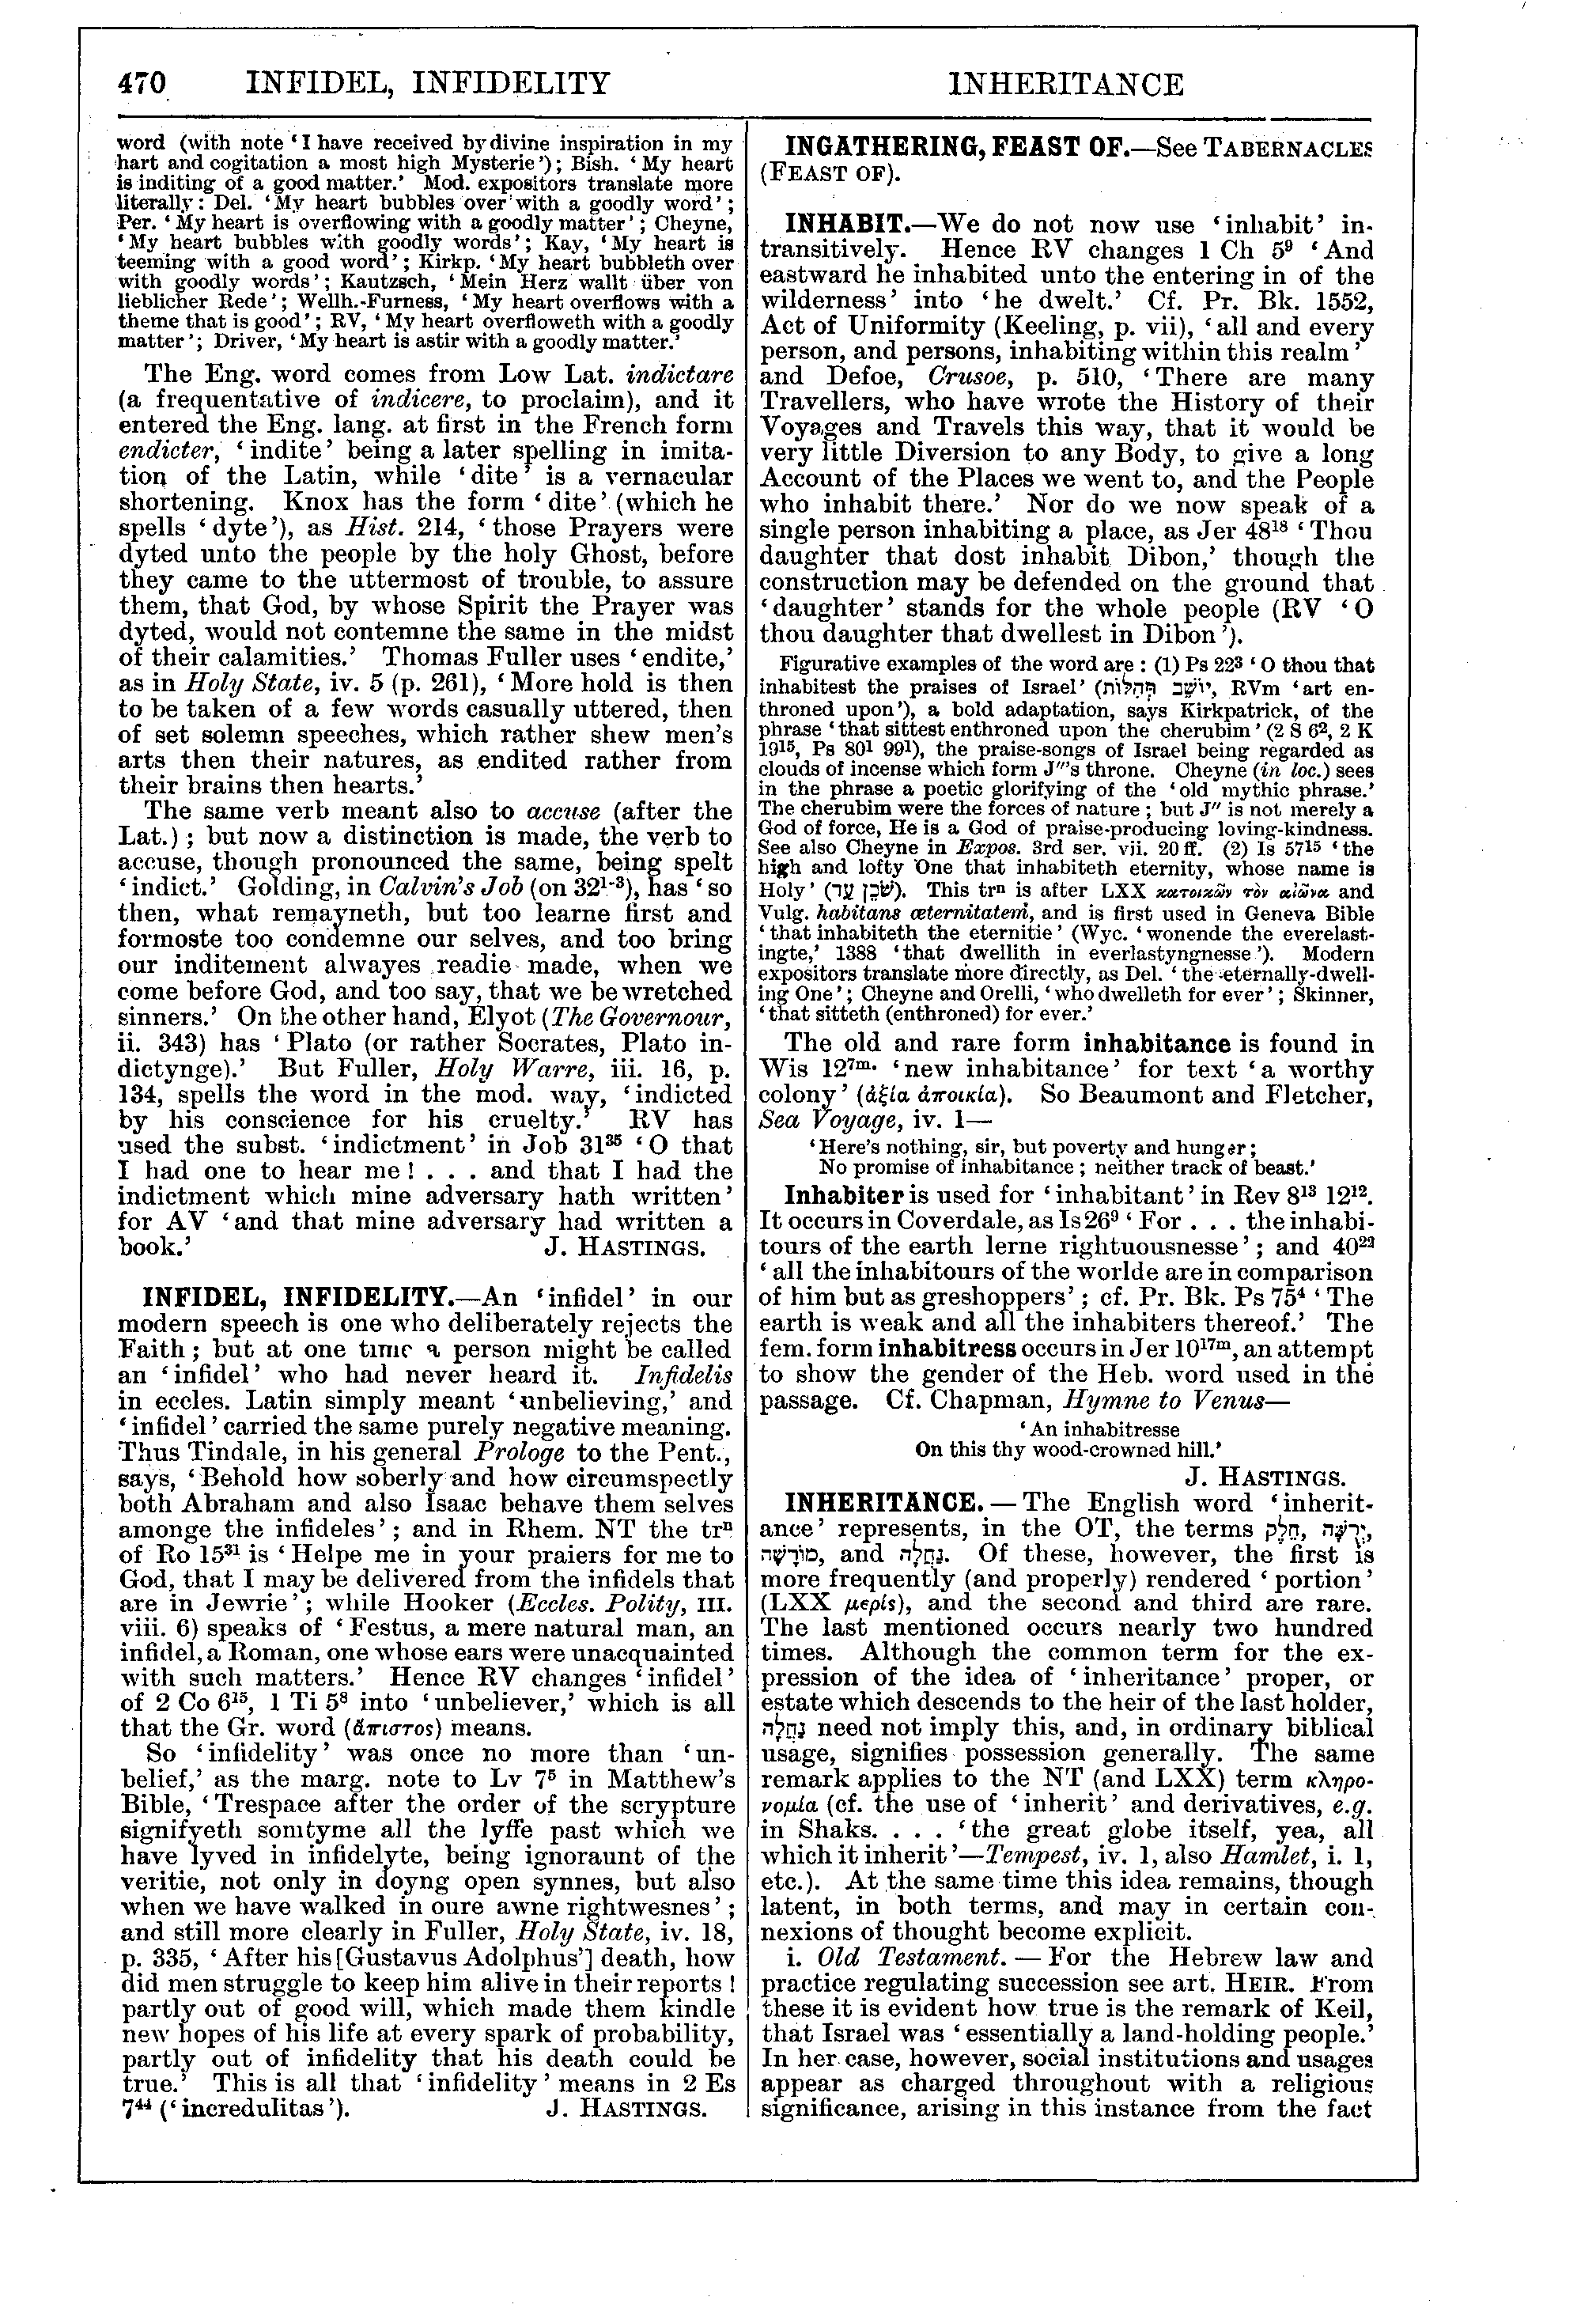 Image of page 470